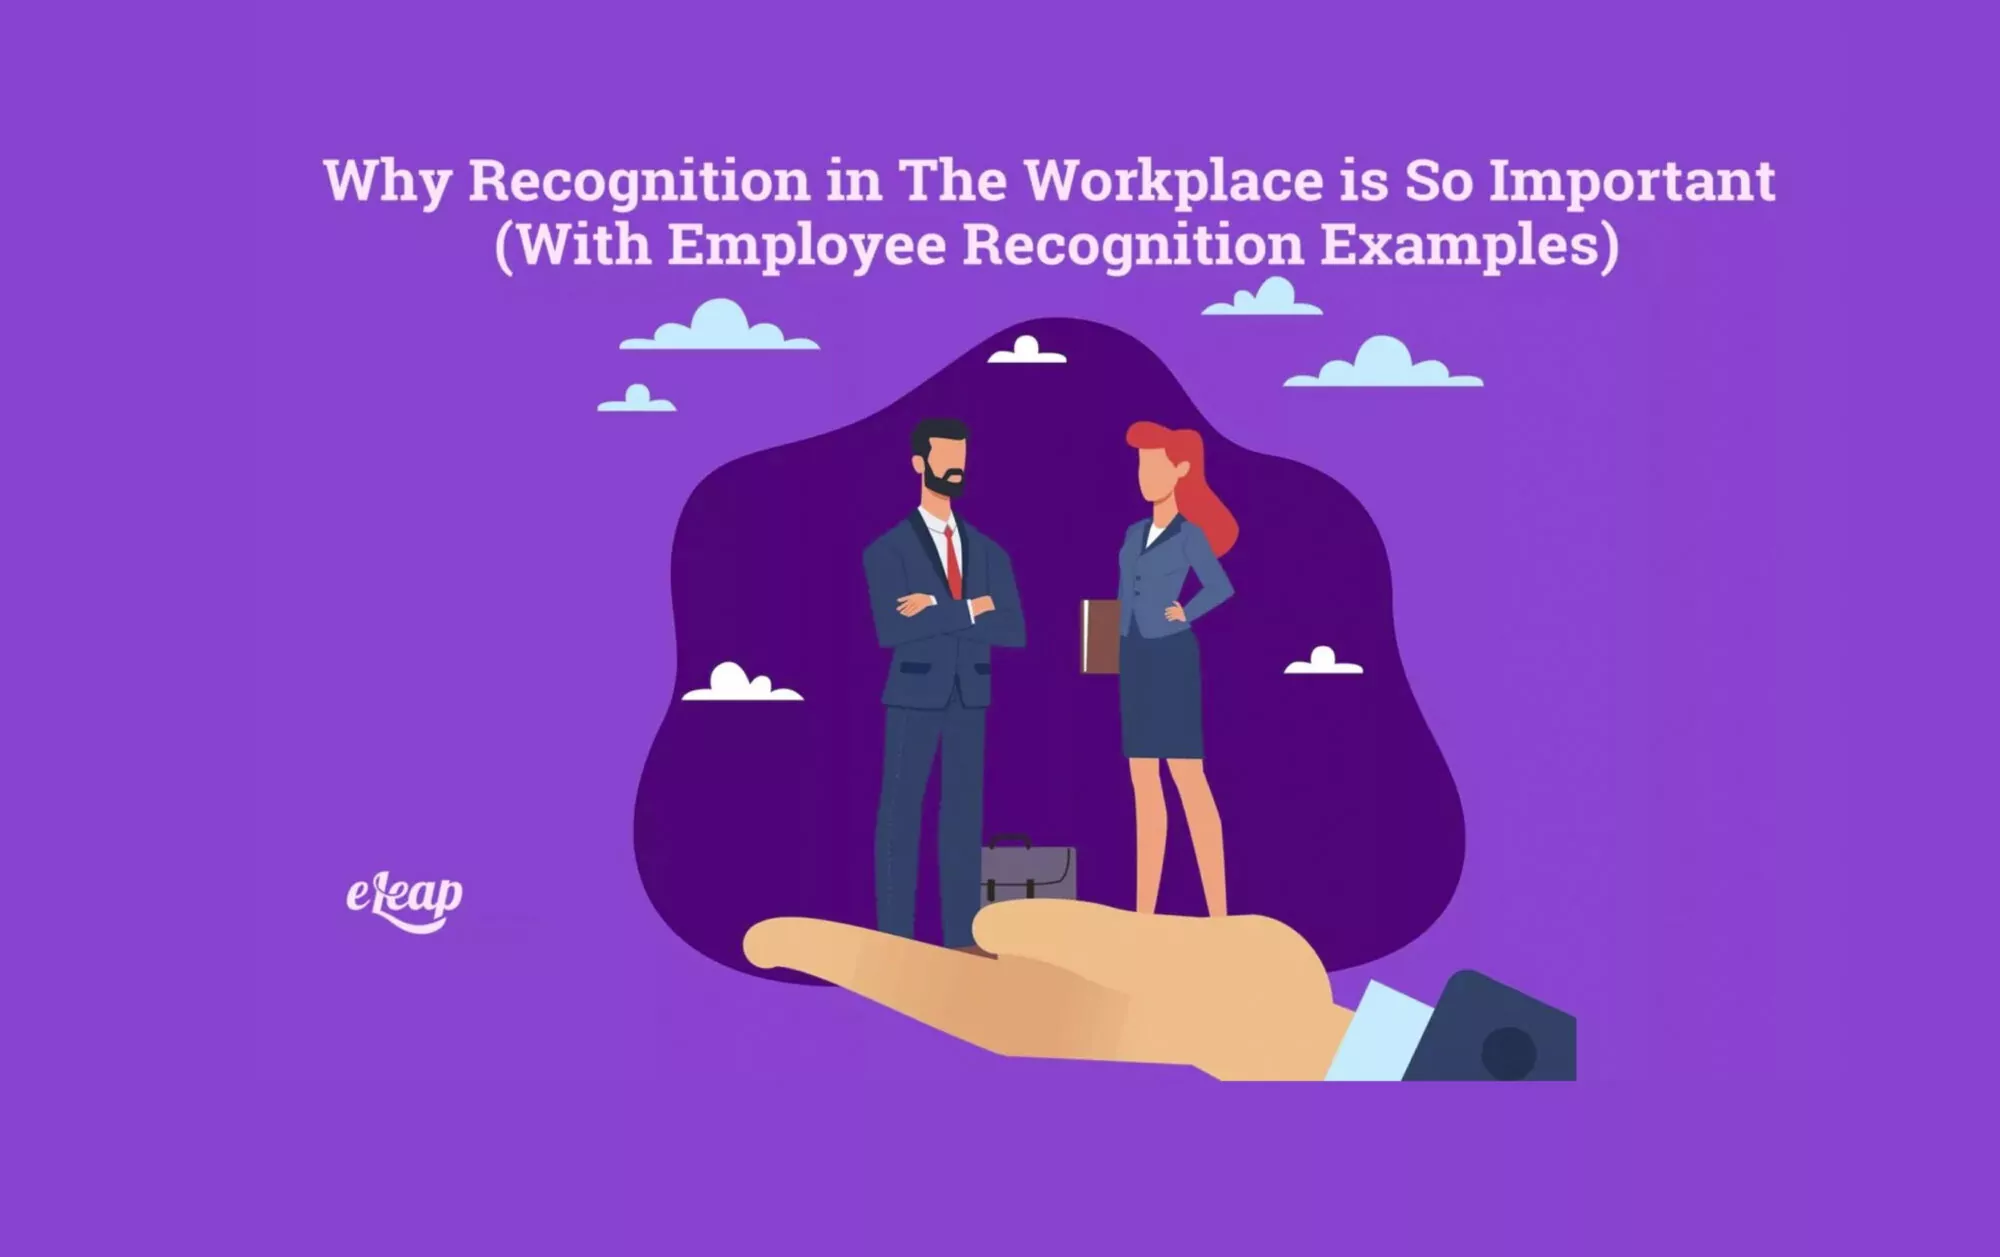 Why Recognition in The Workplace is So Important (With Employee Recognition Examples)